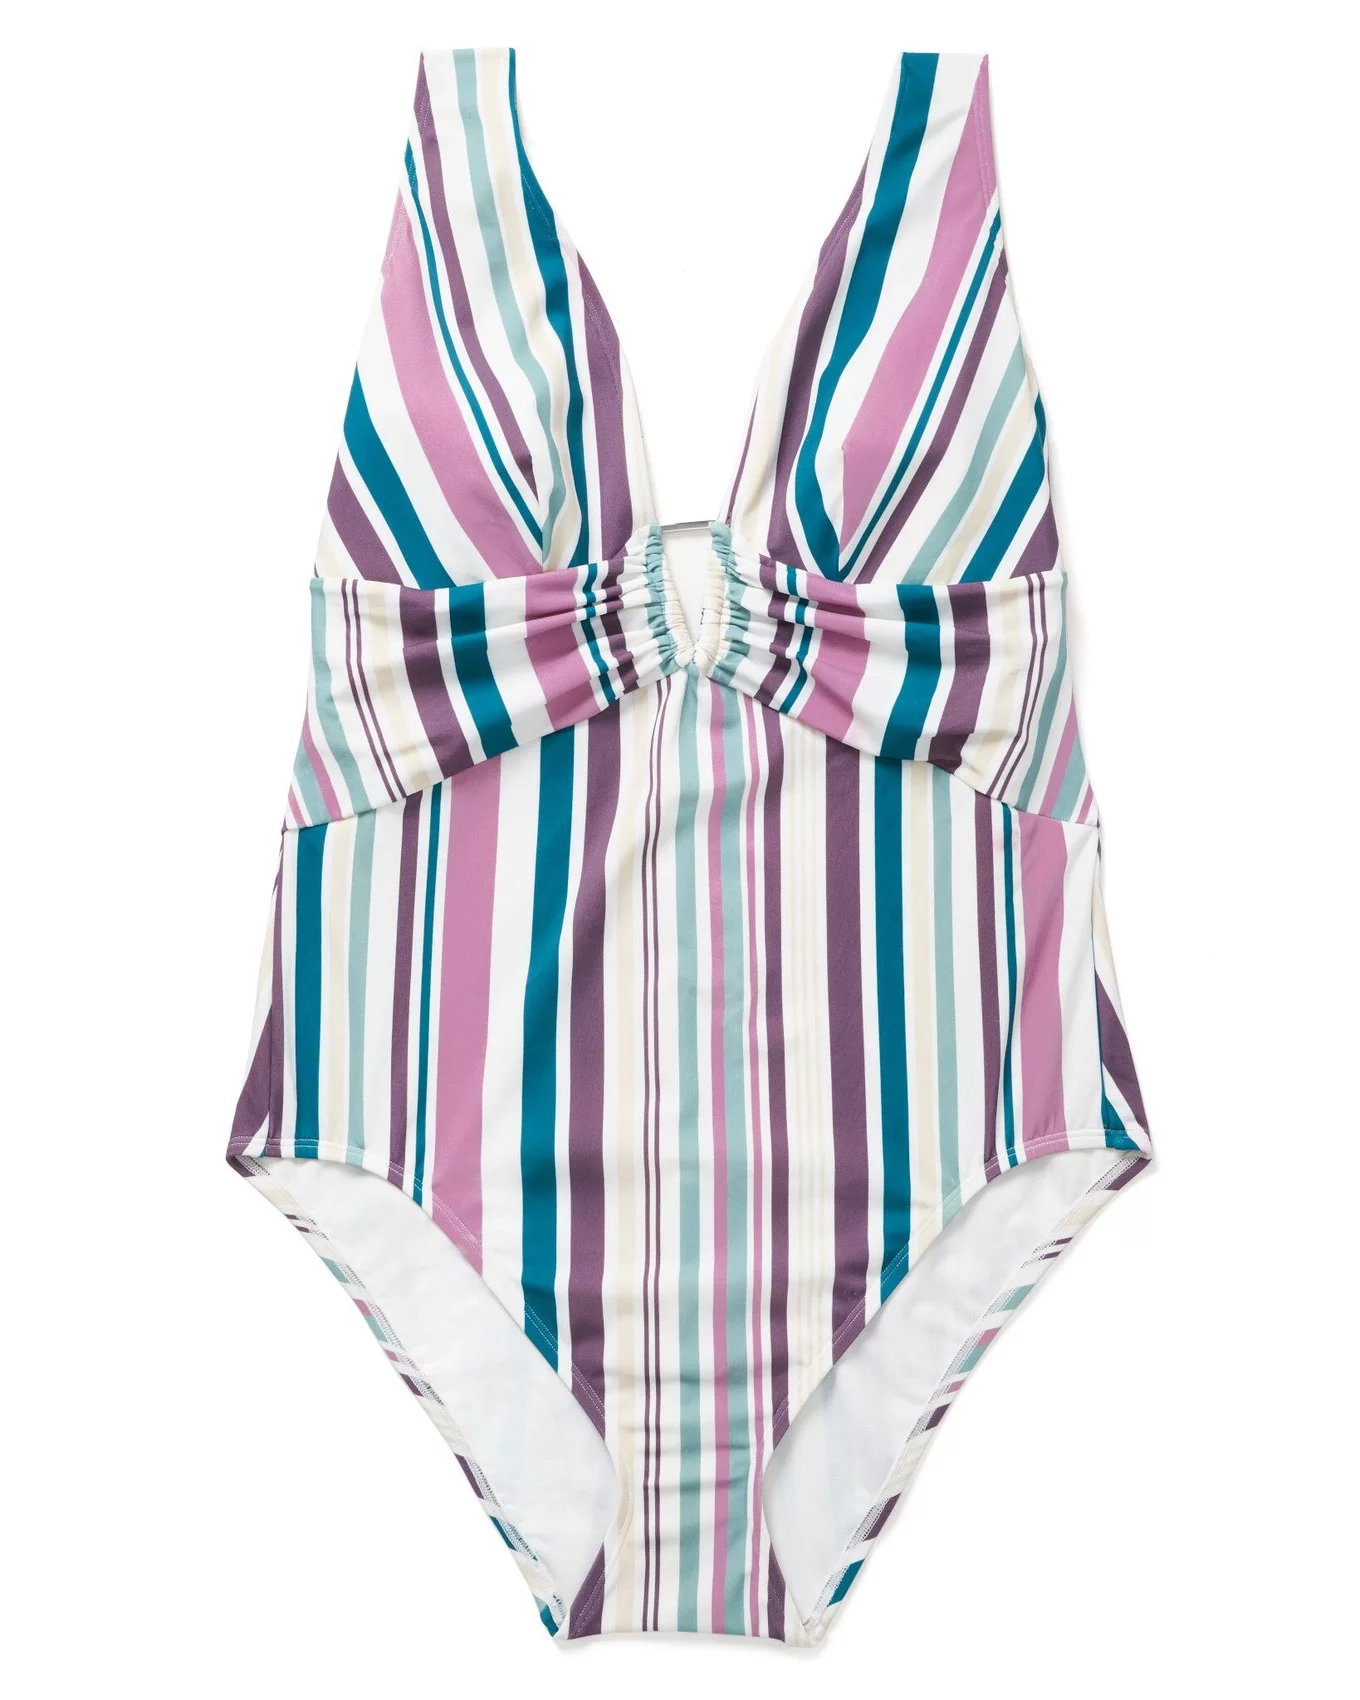 Blue Rosa Ladder Plunge One-Piece Swimsuit Blue White